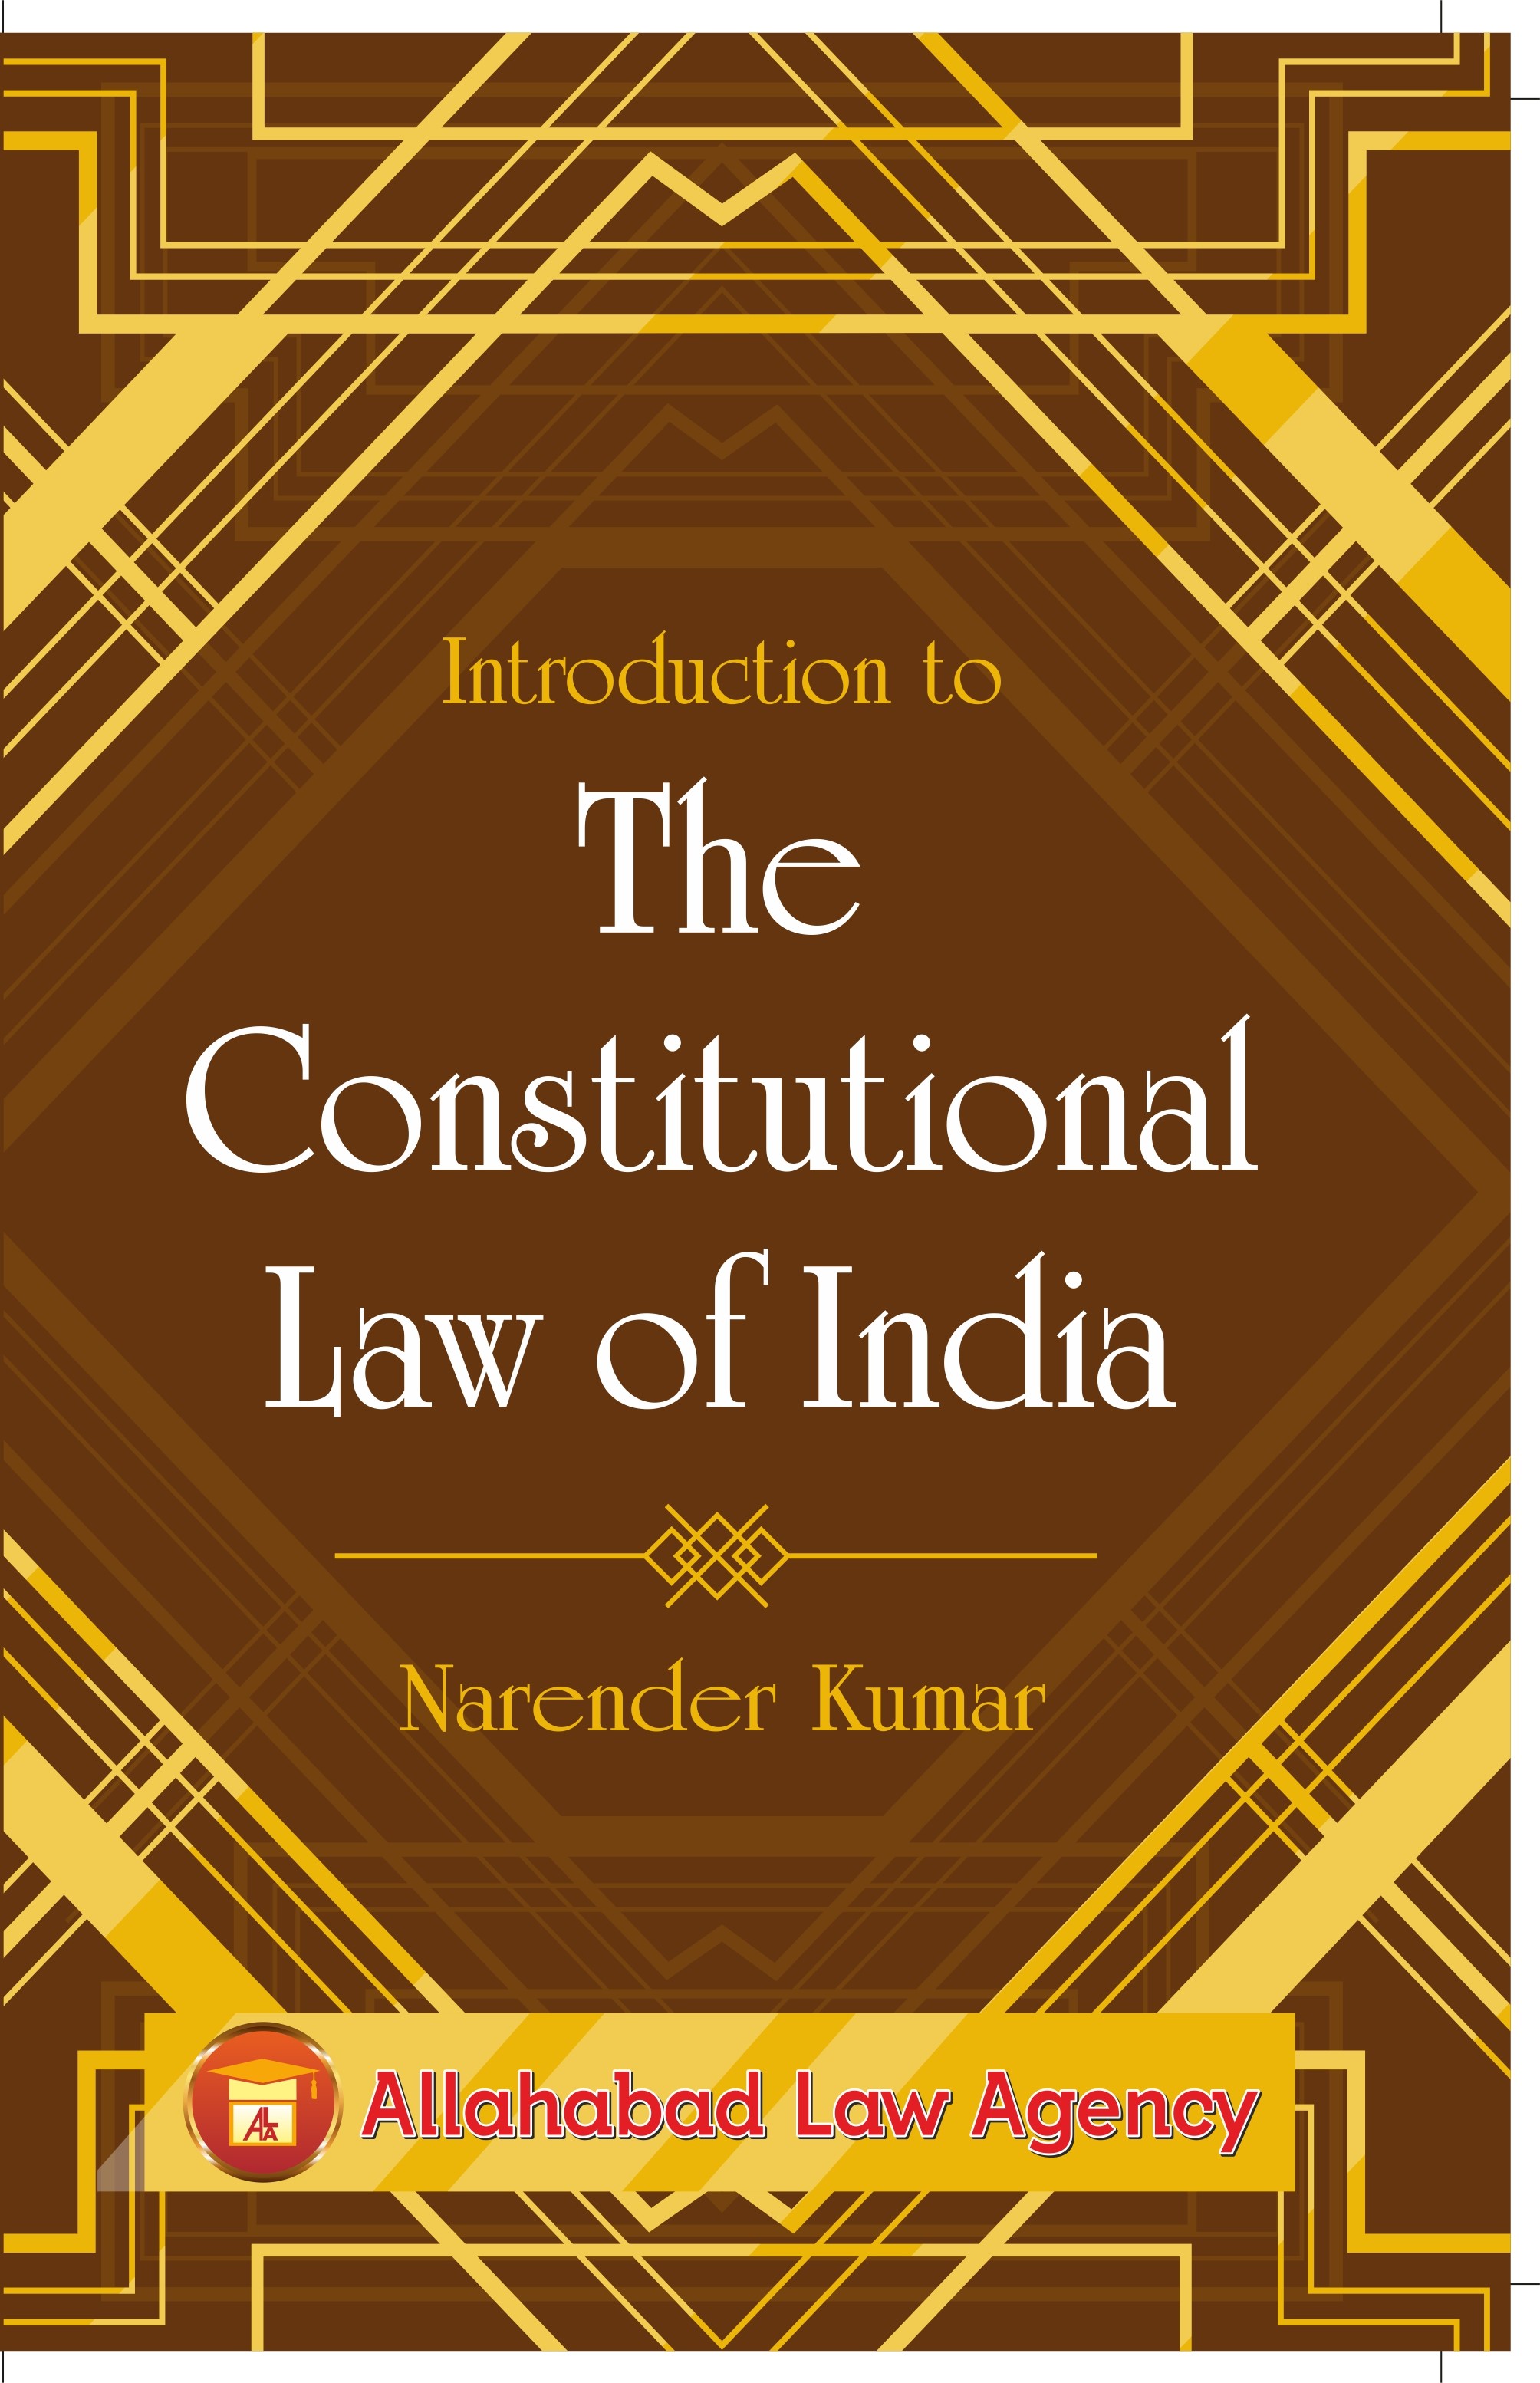 law and order in india essay